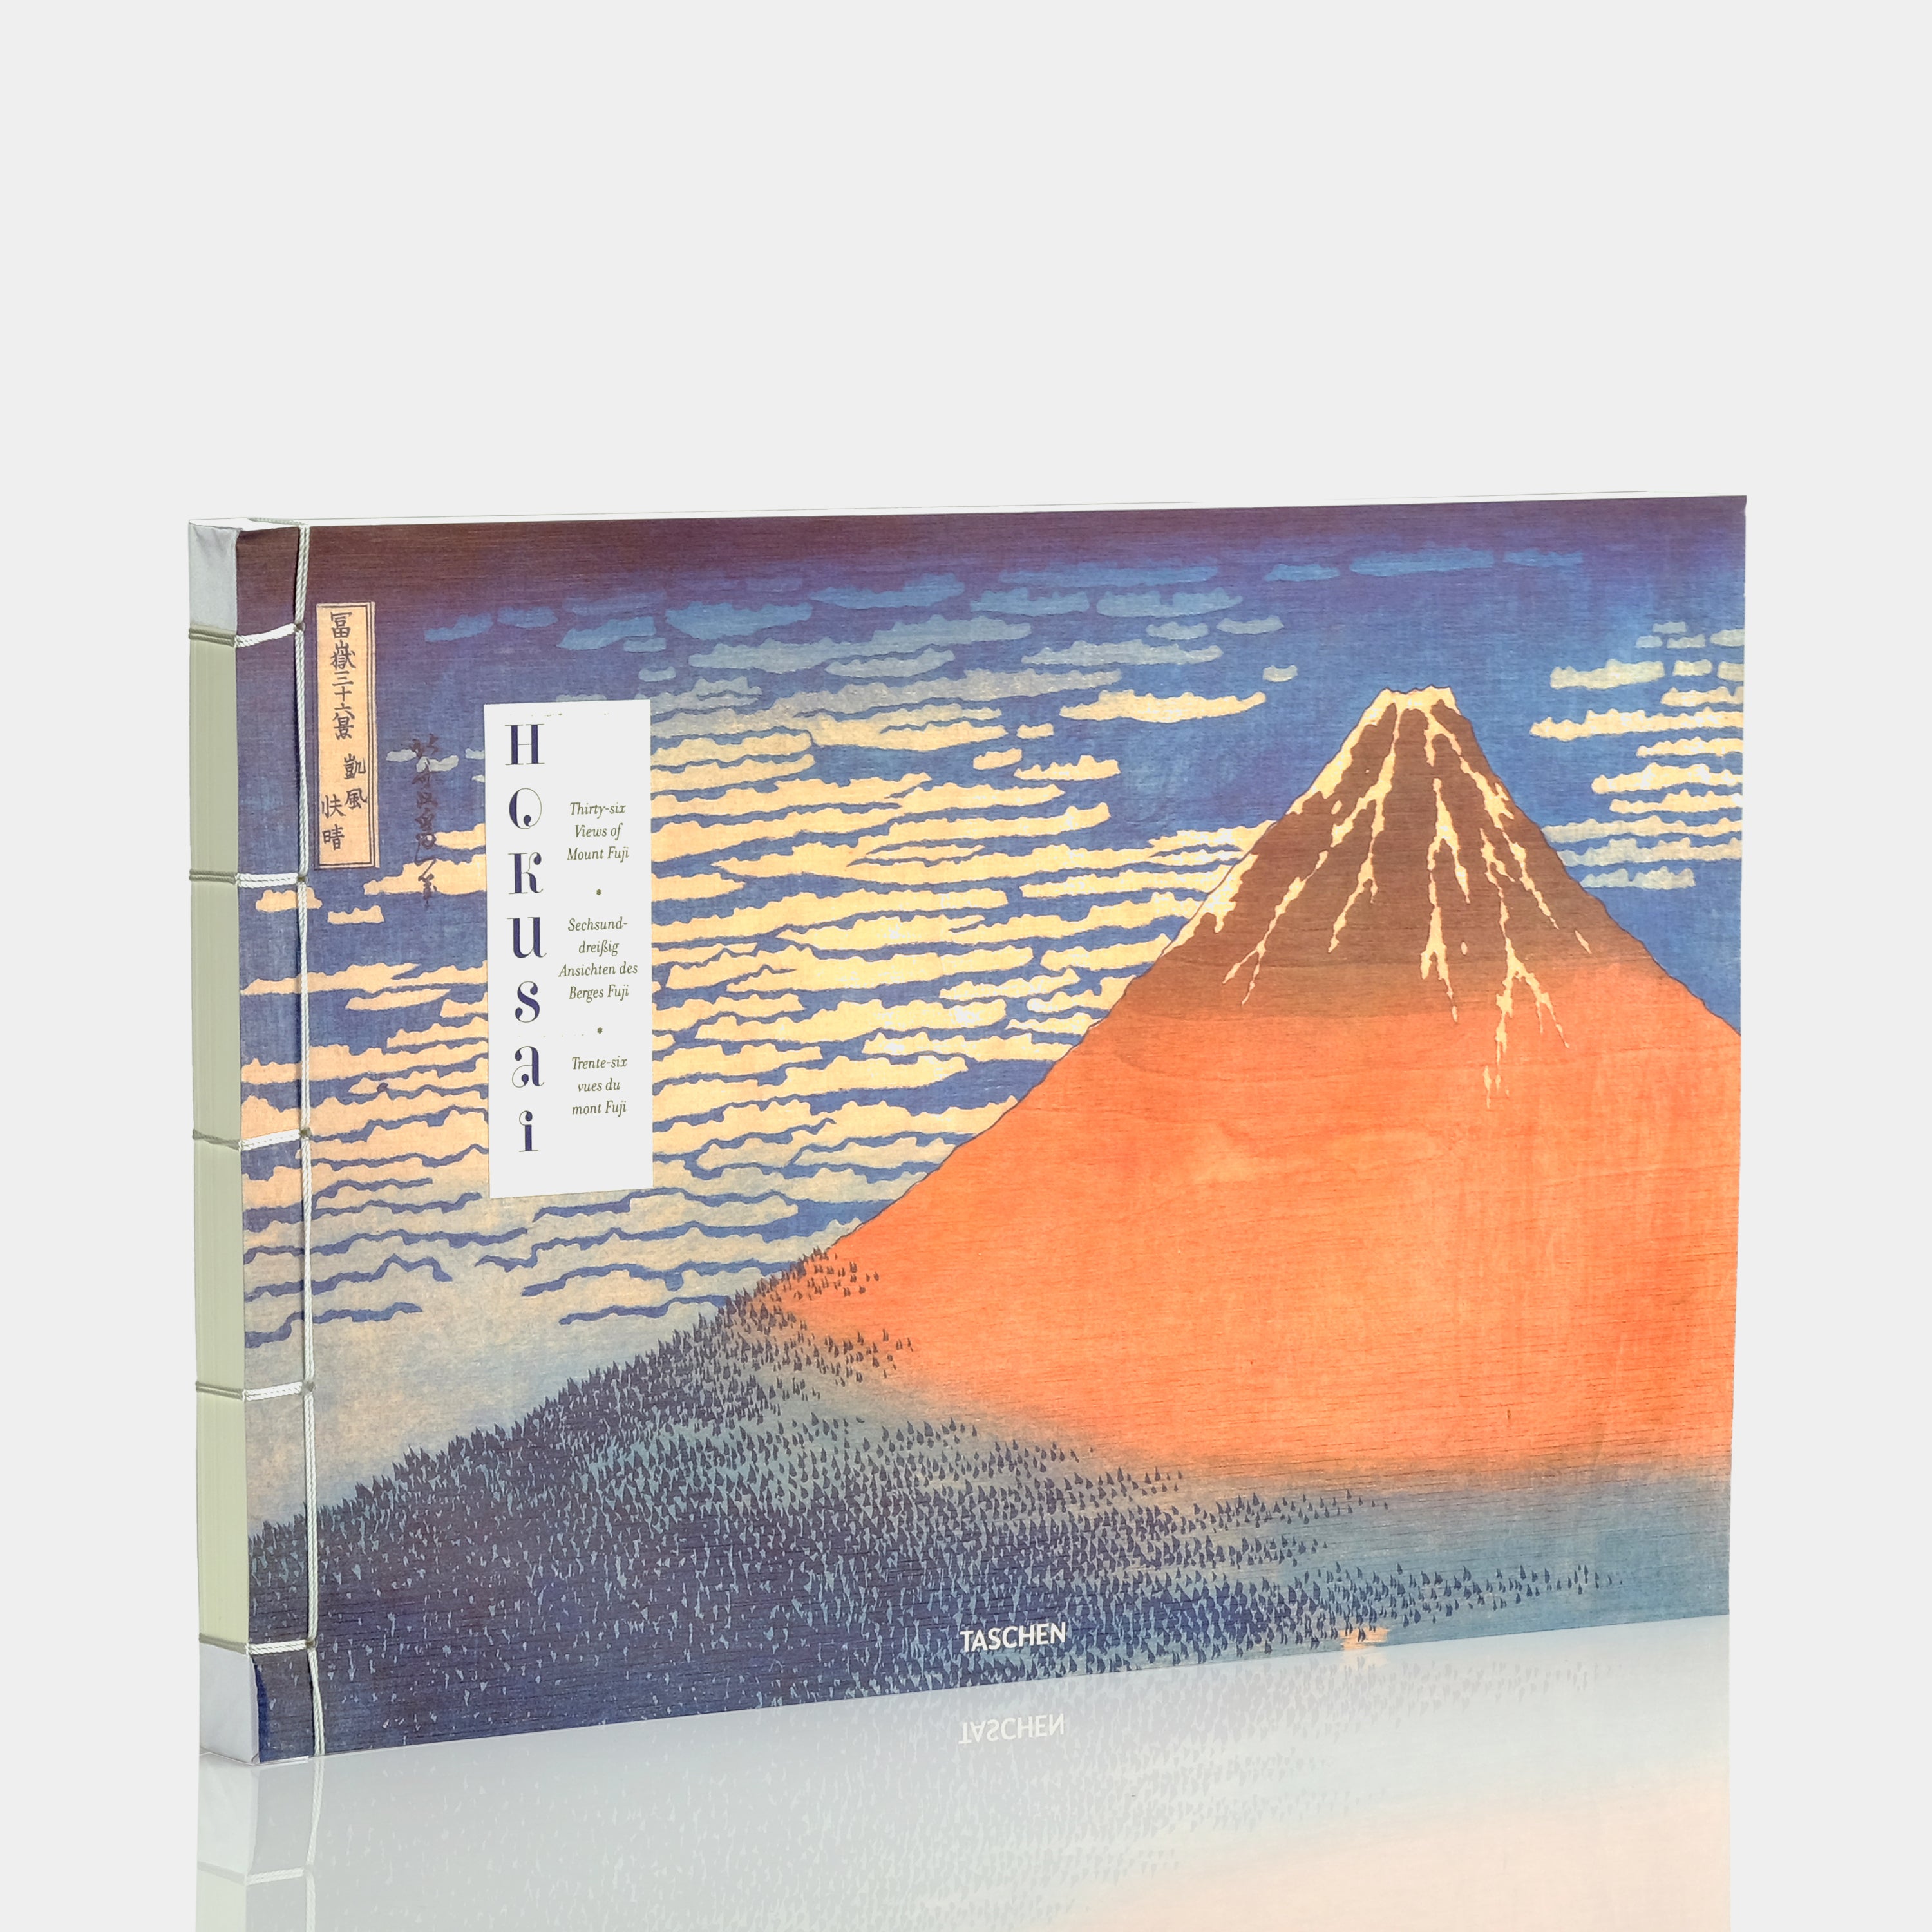 Hokusai: Thirty-six Views of Mount Fuji by Andreas Marks XXL Taschen Book